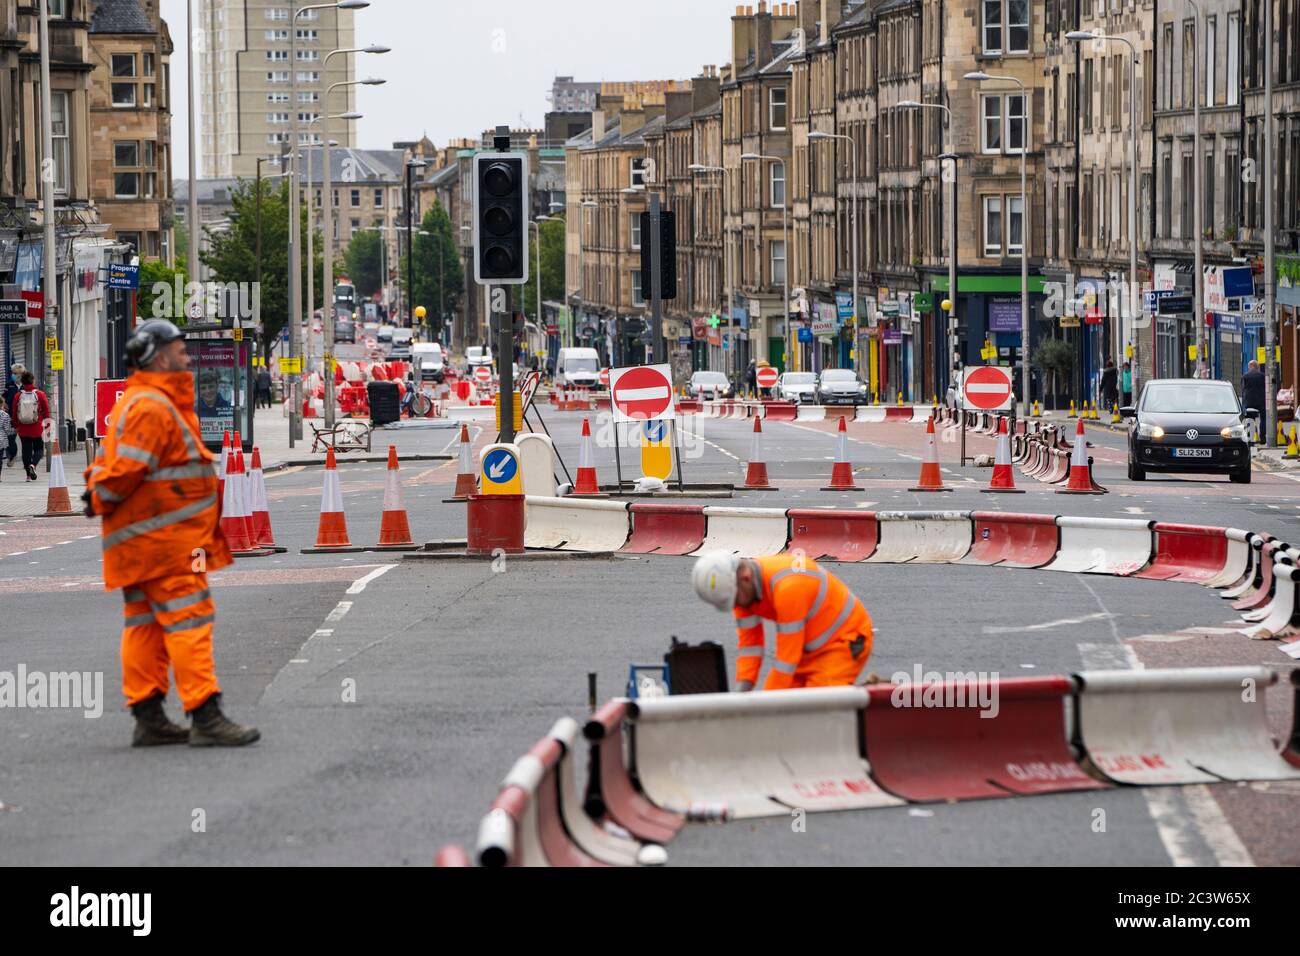 Edinburgh, Scotland, UK. 22 June, 2020. Traffic management work and lane closures on Leith Walk signals the start of construction work for the new Edinburgh tram line extension to Newhaven. Disruption to traffic and businesses on Leith Walk is expected to last for over a year. Iain Masterton/Alamy Live News Stock Photo